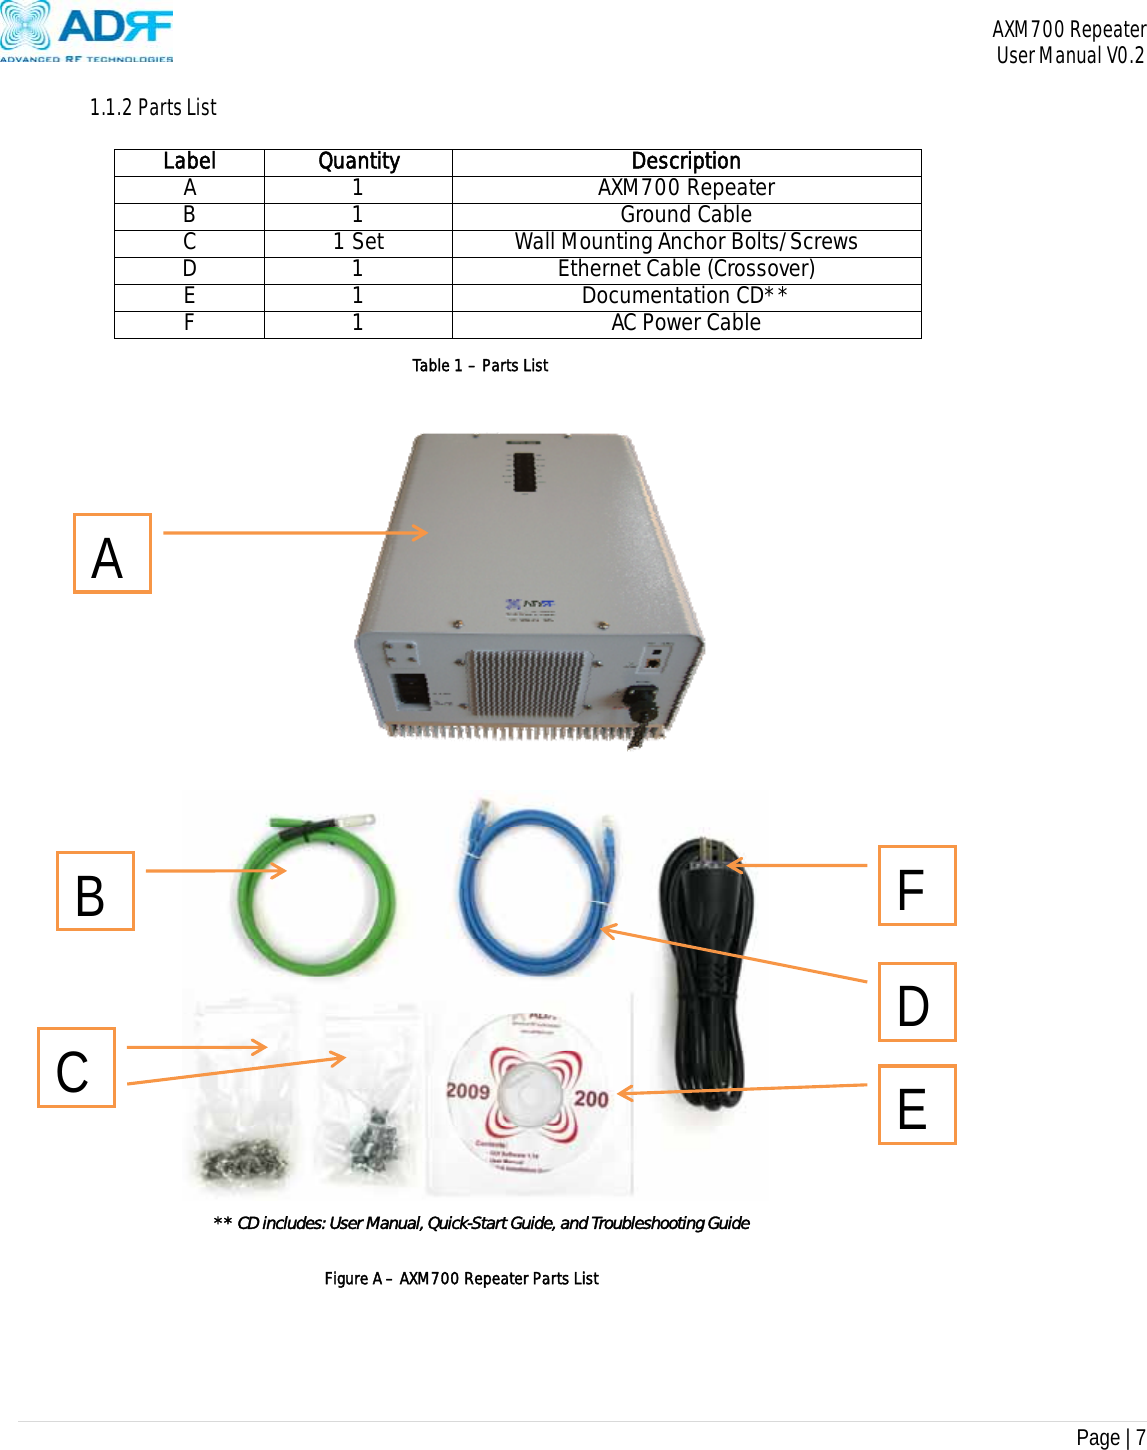 AXM700 Repeater     User Manual V0.2  Page | 7    1.1.2 Parts List  Label Quantity DescriptionA 1  AXM700 RepeaterB 1  Ground CableC  1 Set  Wall Mounting Anchor Bolts/Screws D  1  Ethernet Cable (Crossover)E 1  Documentation CD**F 1  AC Power Cable                                    ** CD includes: User Manual, Quick-Start Guide, and Troubleshooting Guide Figure A – AXM700 Repeater Parts ListTable 1 – Parts List A F D E B C 